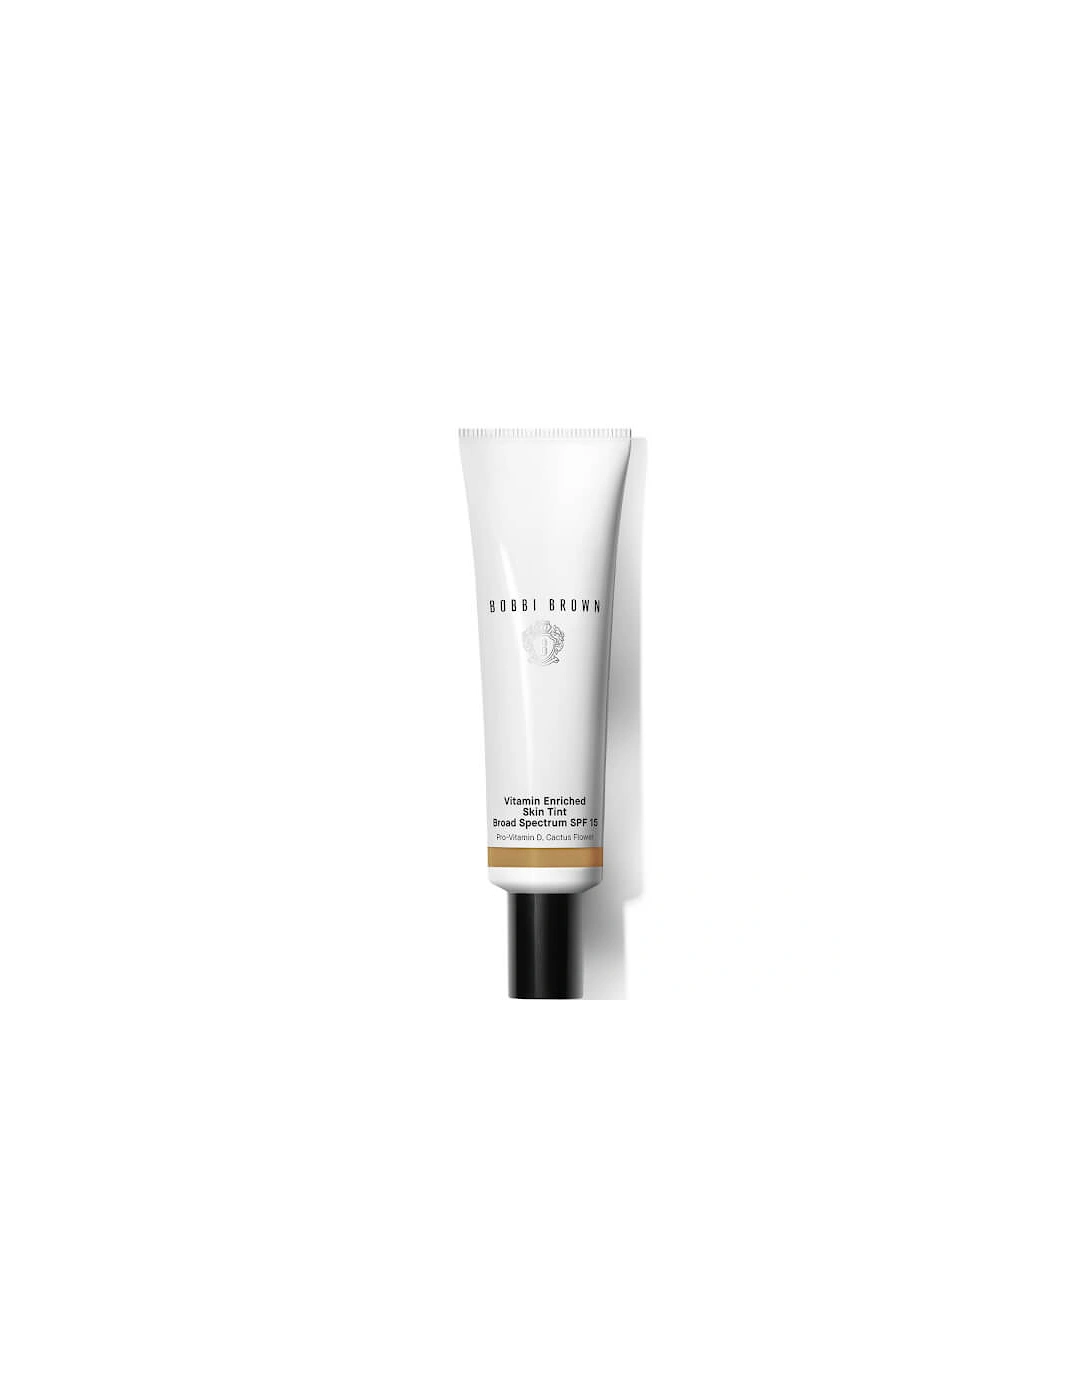 Vitamin Enriched Skin Tint - Rich 2, 2 of 1